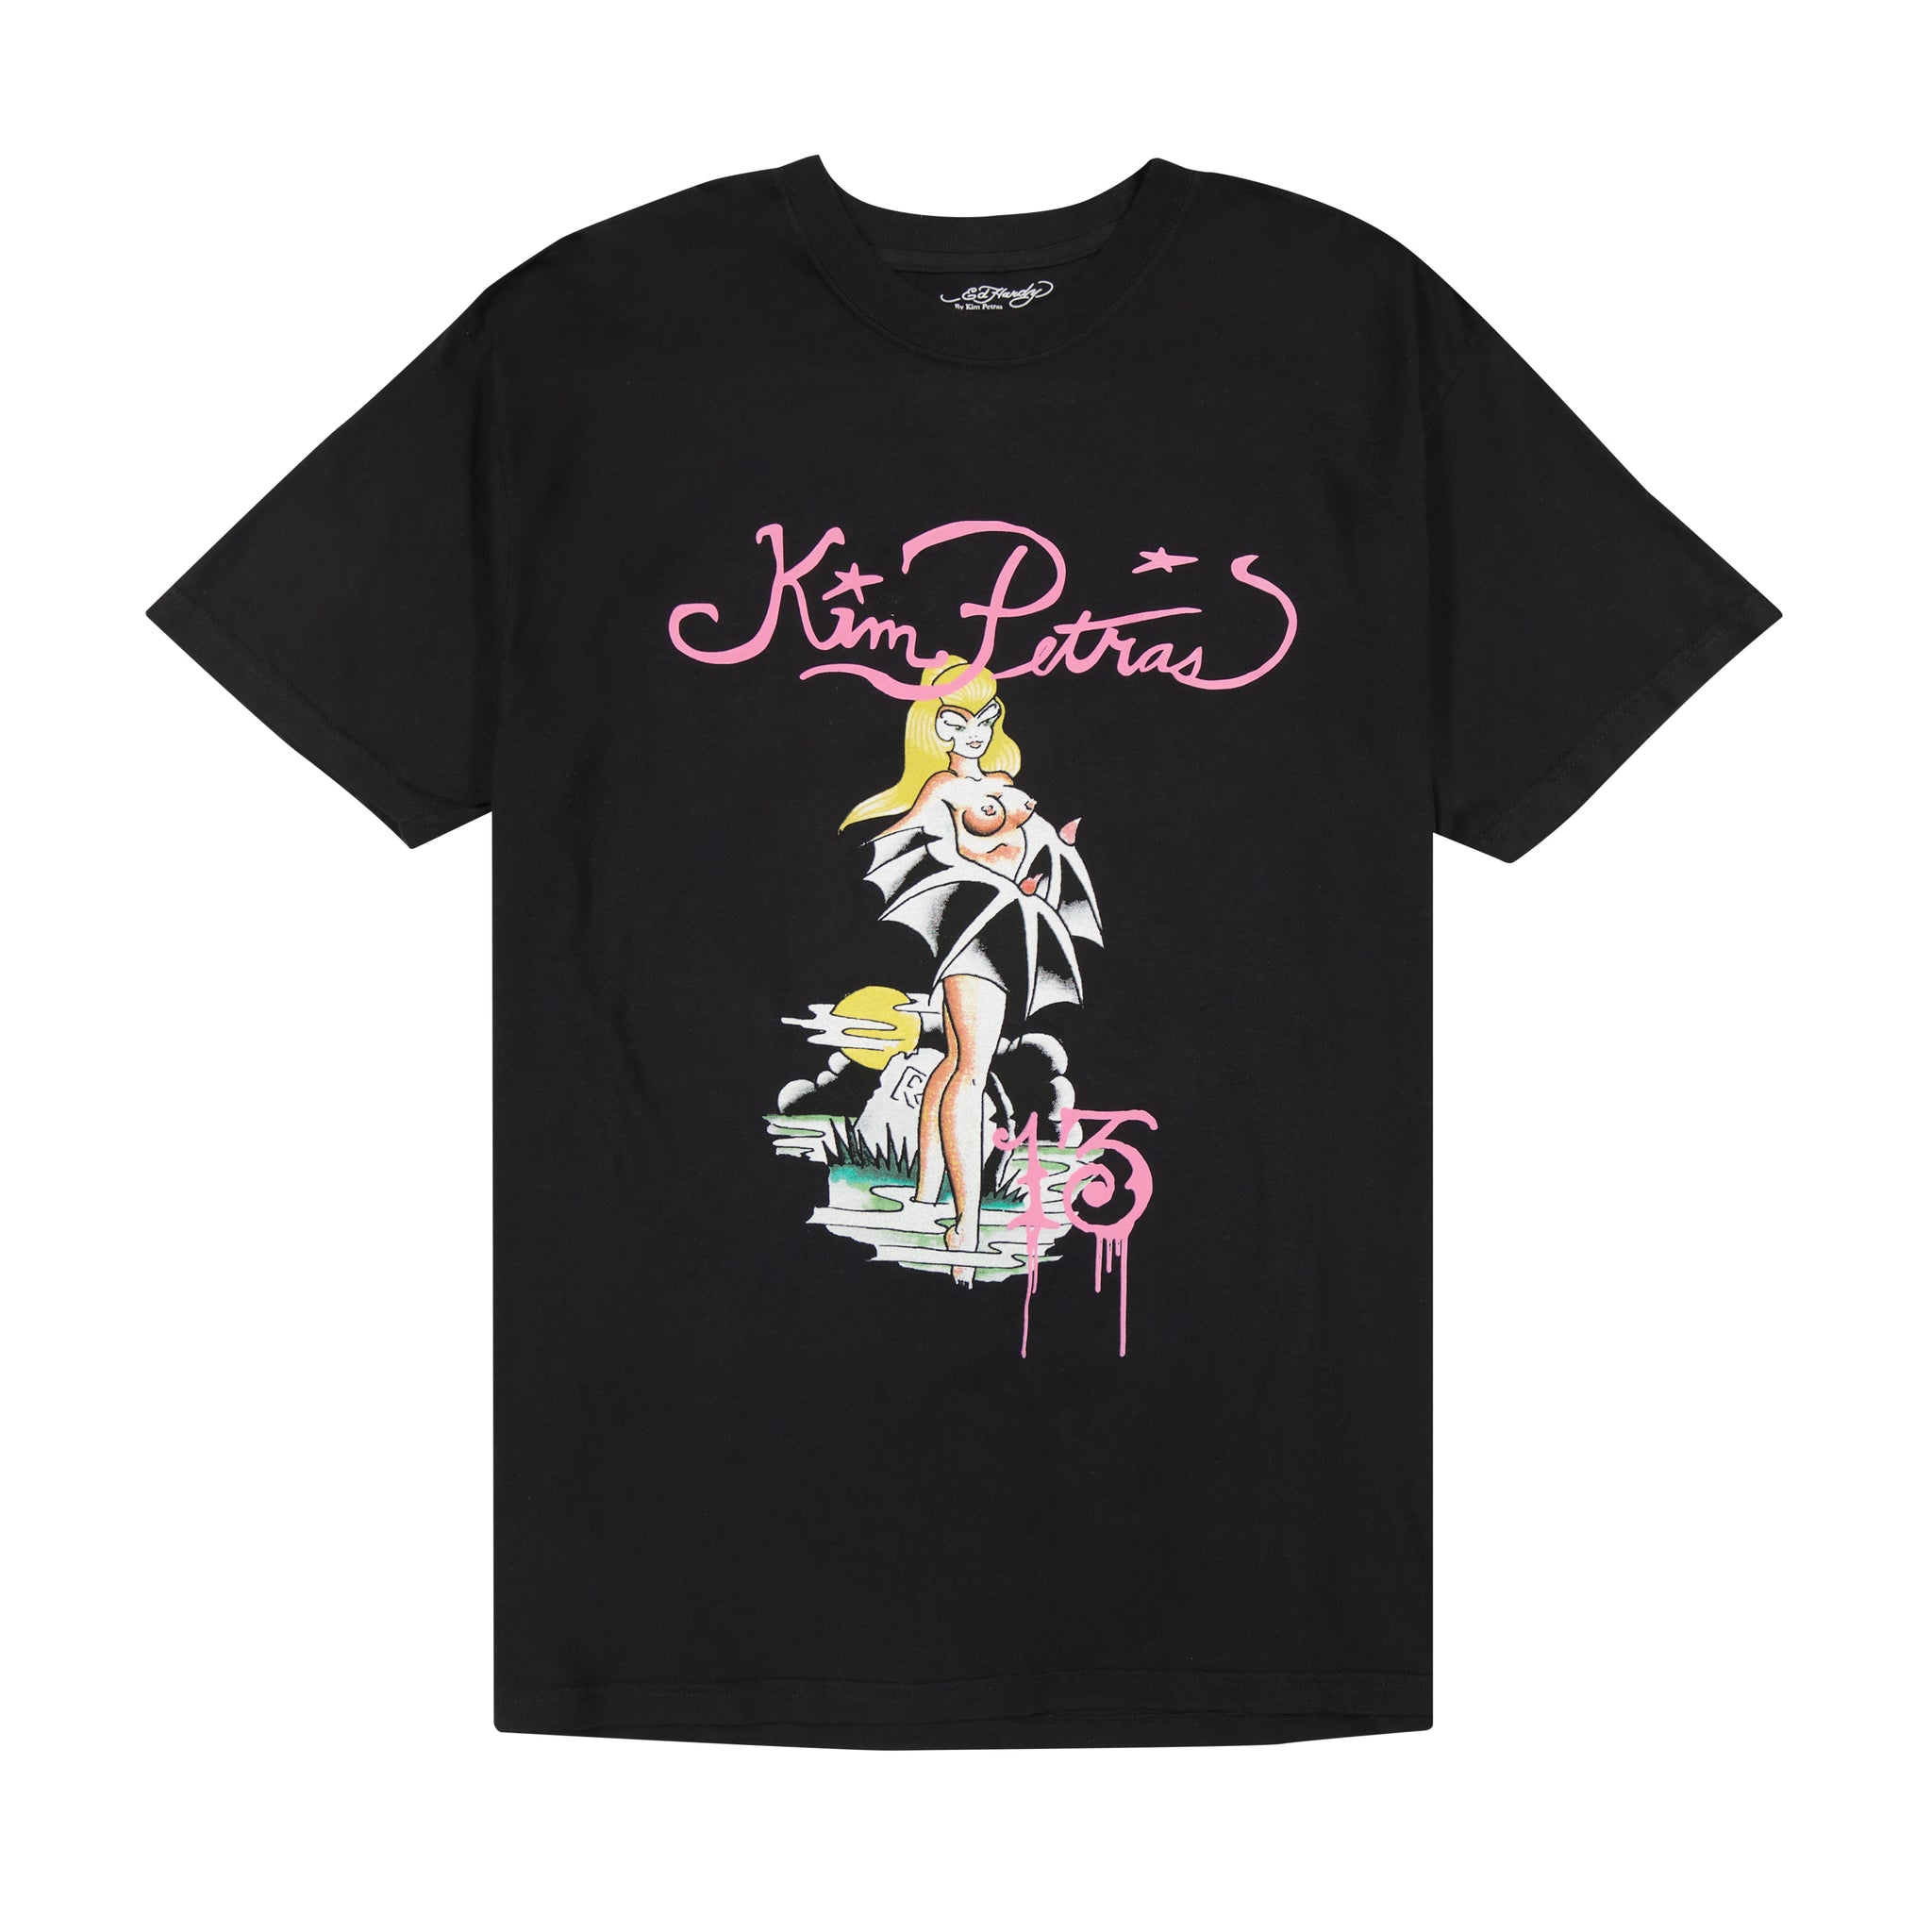 💘 ED HARDY and SAVAGEXFENTY💘 💘 100% Cotton Official Ed Hardy Tee XL,  $18) 💘 SOLD Savage X Fenty Mesh Flower Robe (2X, $18)